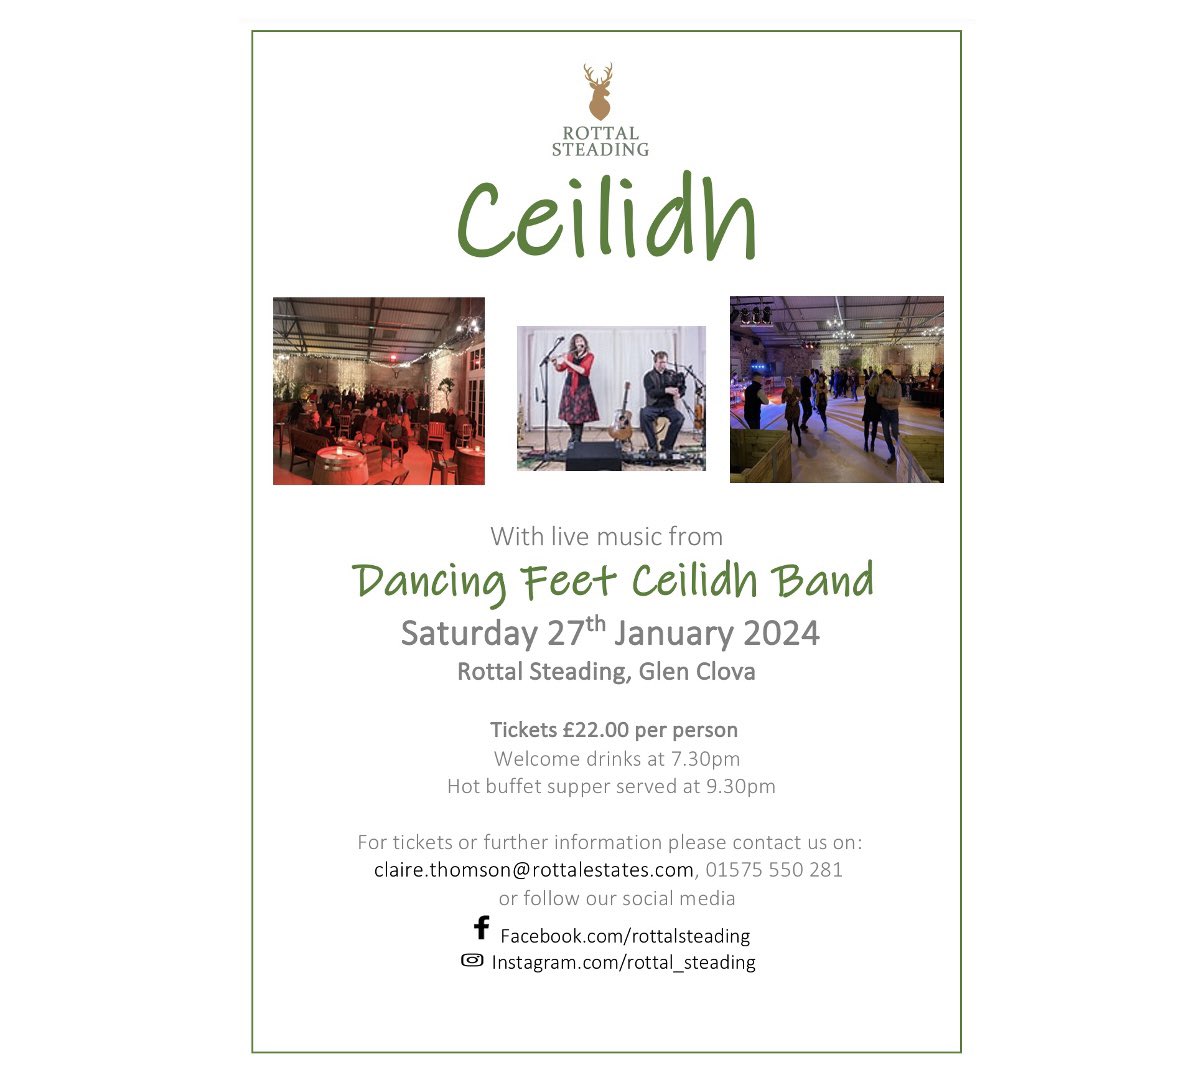 There are still a few tickets available for our Rottal Ceilidh tomorrow evening 🏴󠁧󠁢󠁳󠁣󠁴󠁿🎻🎶 It’s family friendly, tickets cost £22 (£10 for children) and it’s sure to be a fun evening! Please email claire.thomson@rottalestates to purchase your tickets now.